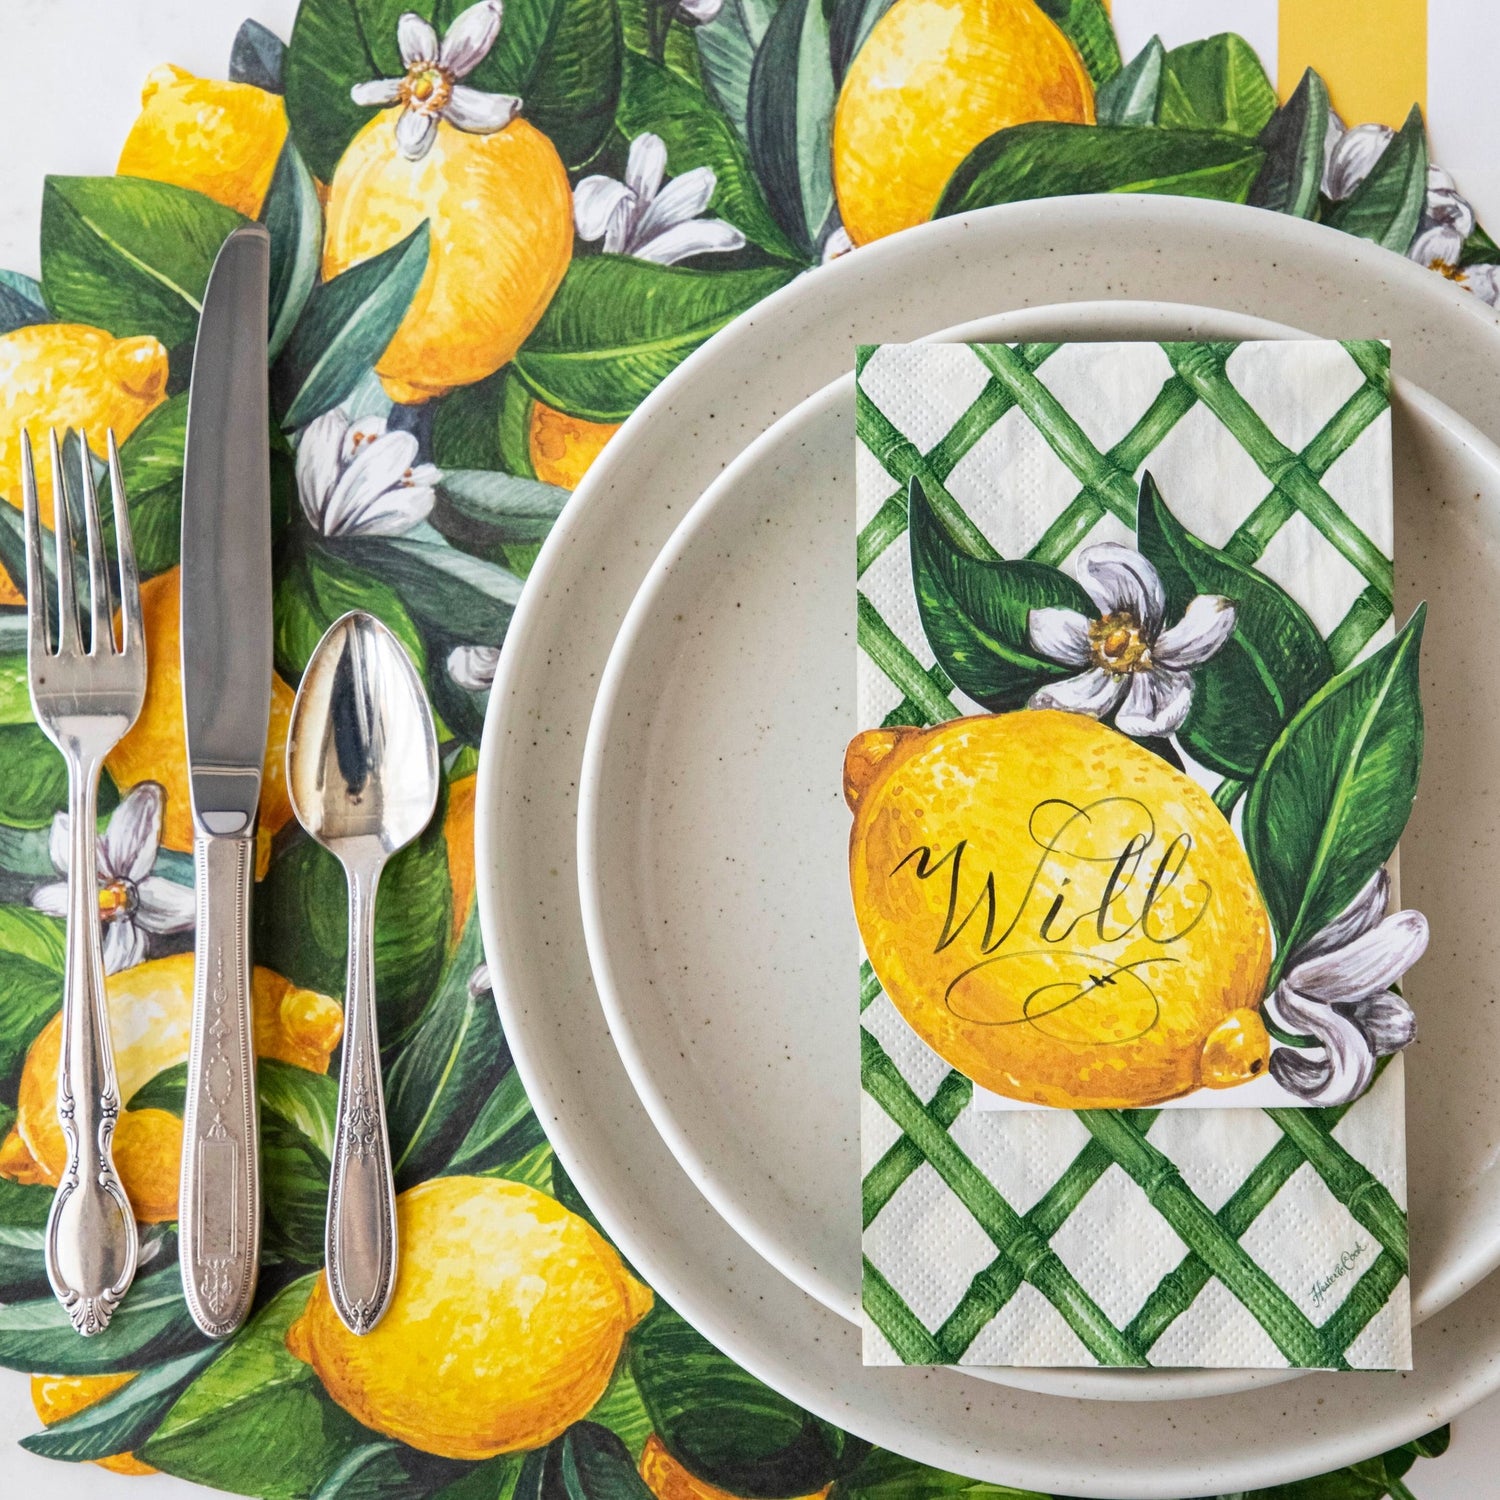 The Die-cut Lemon Wreath under an elegant place setting, from above.